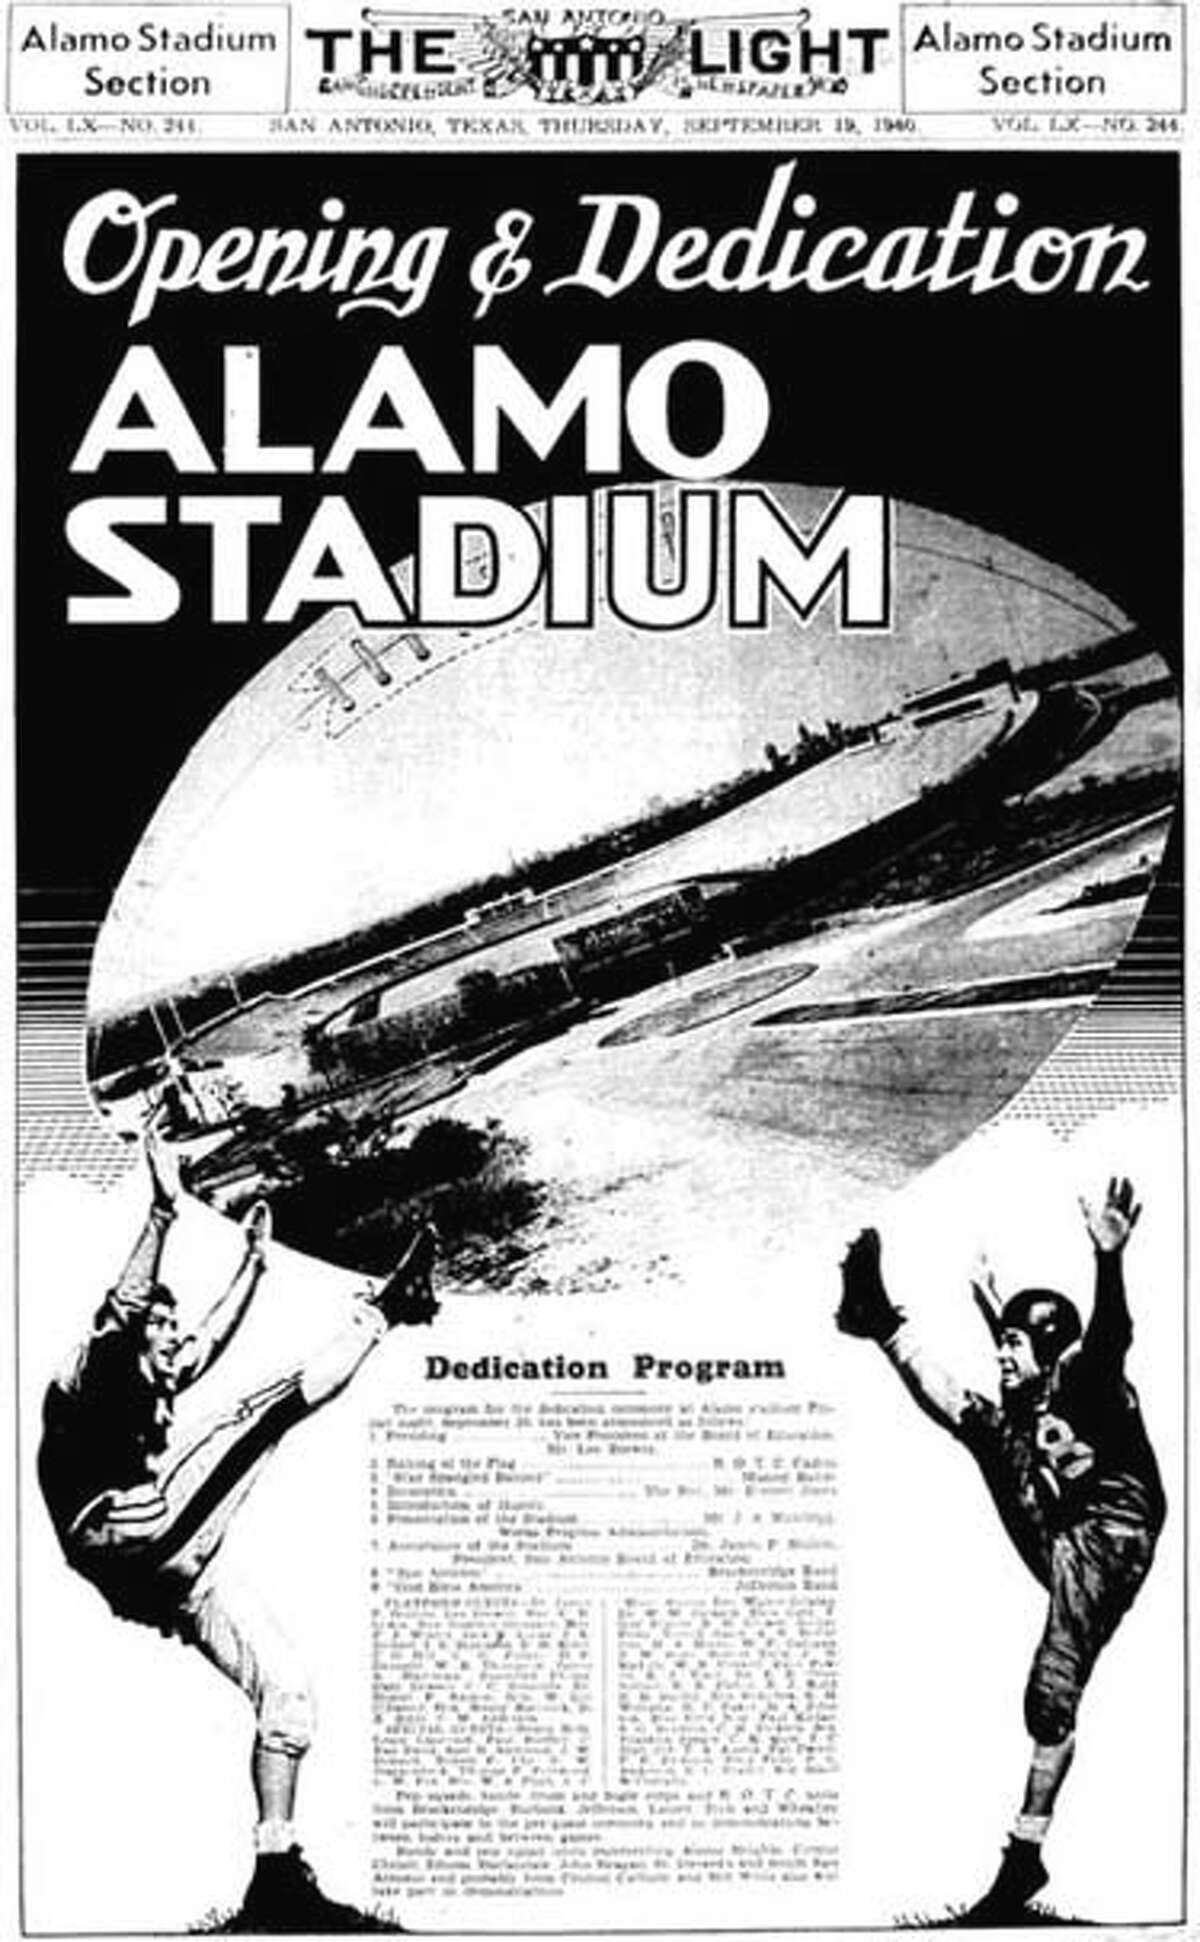 Alamo Stadium’s opening was big news on Sept. 20, 1940. It was the site for two games that day.